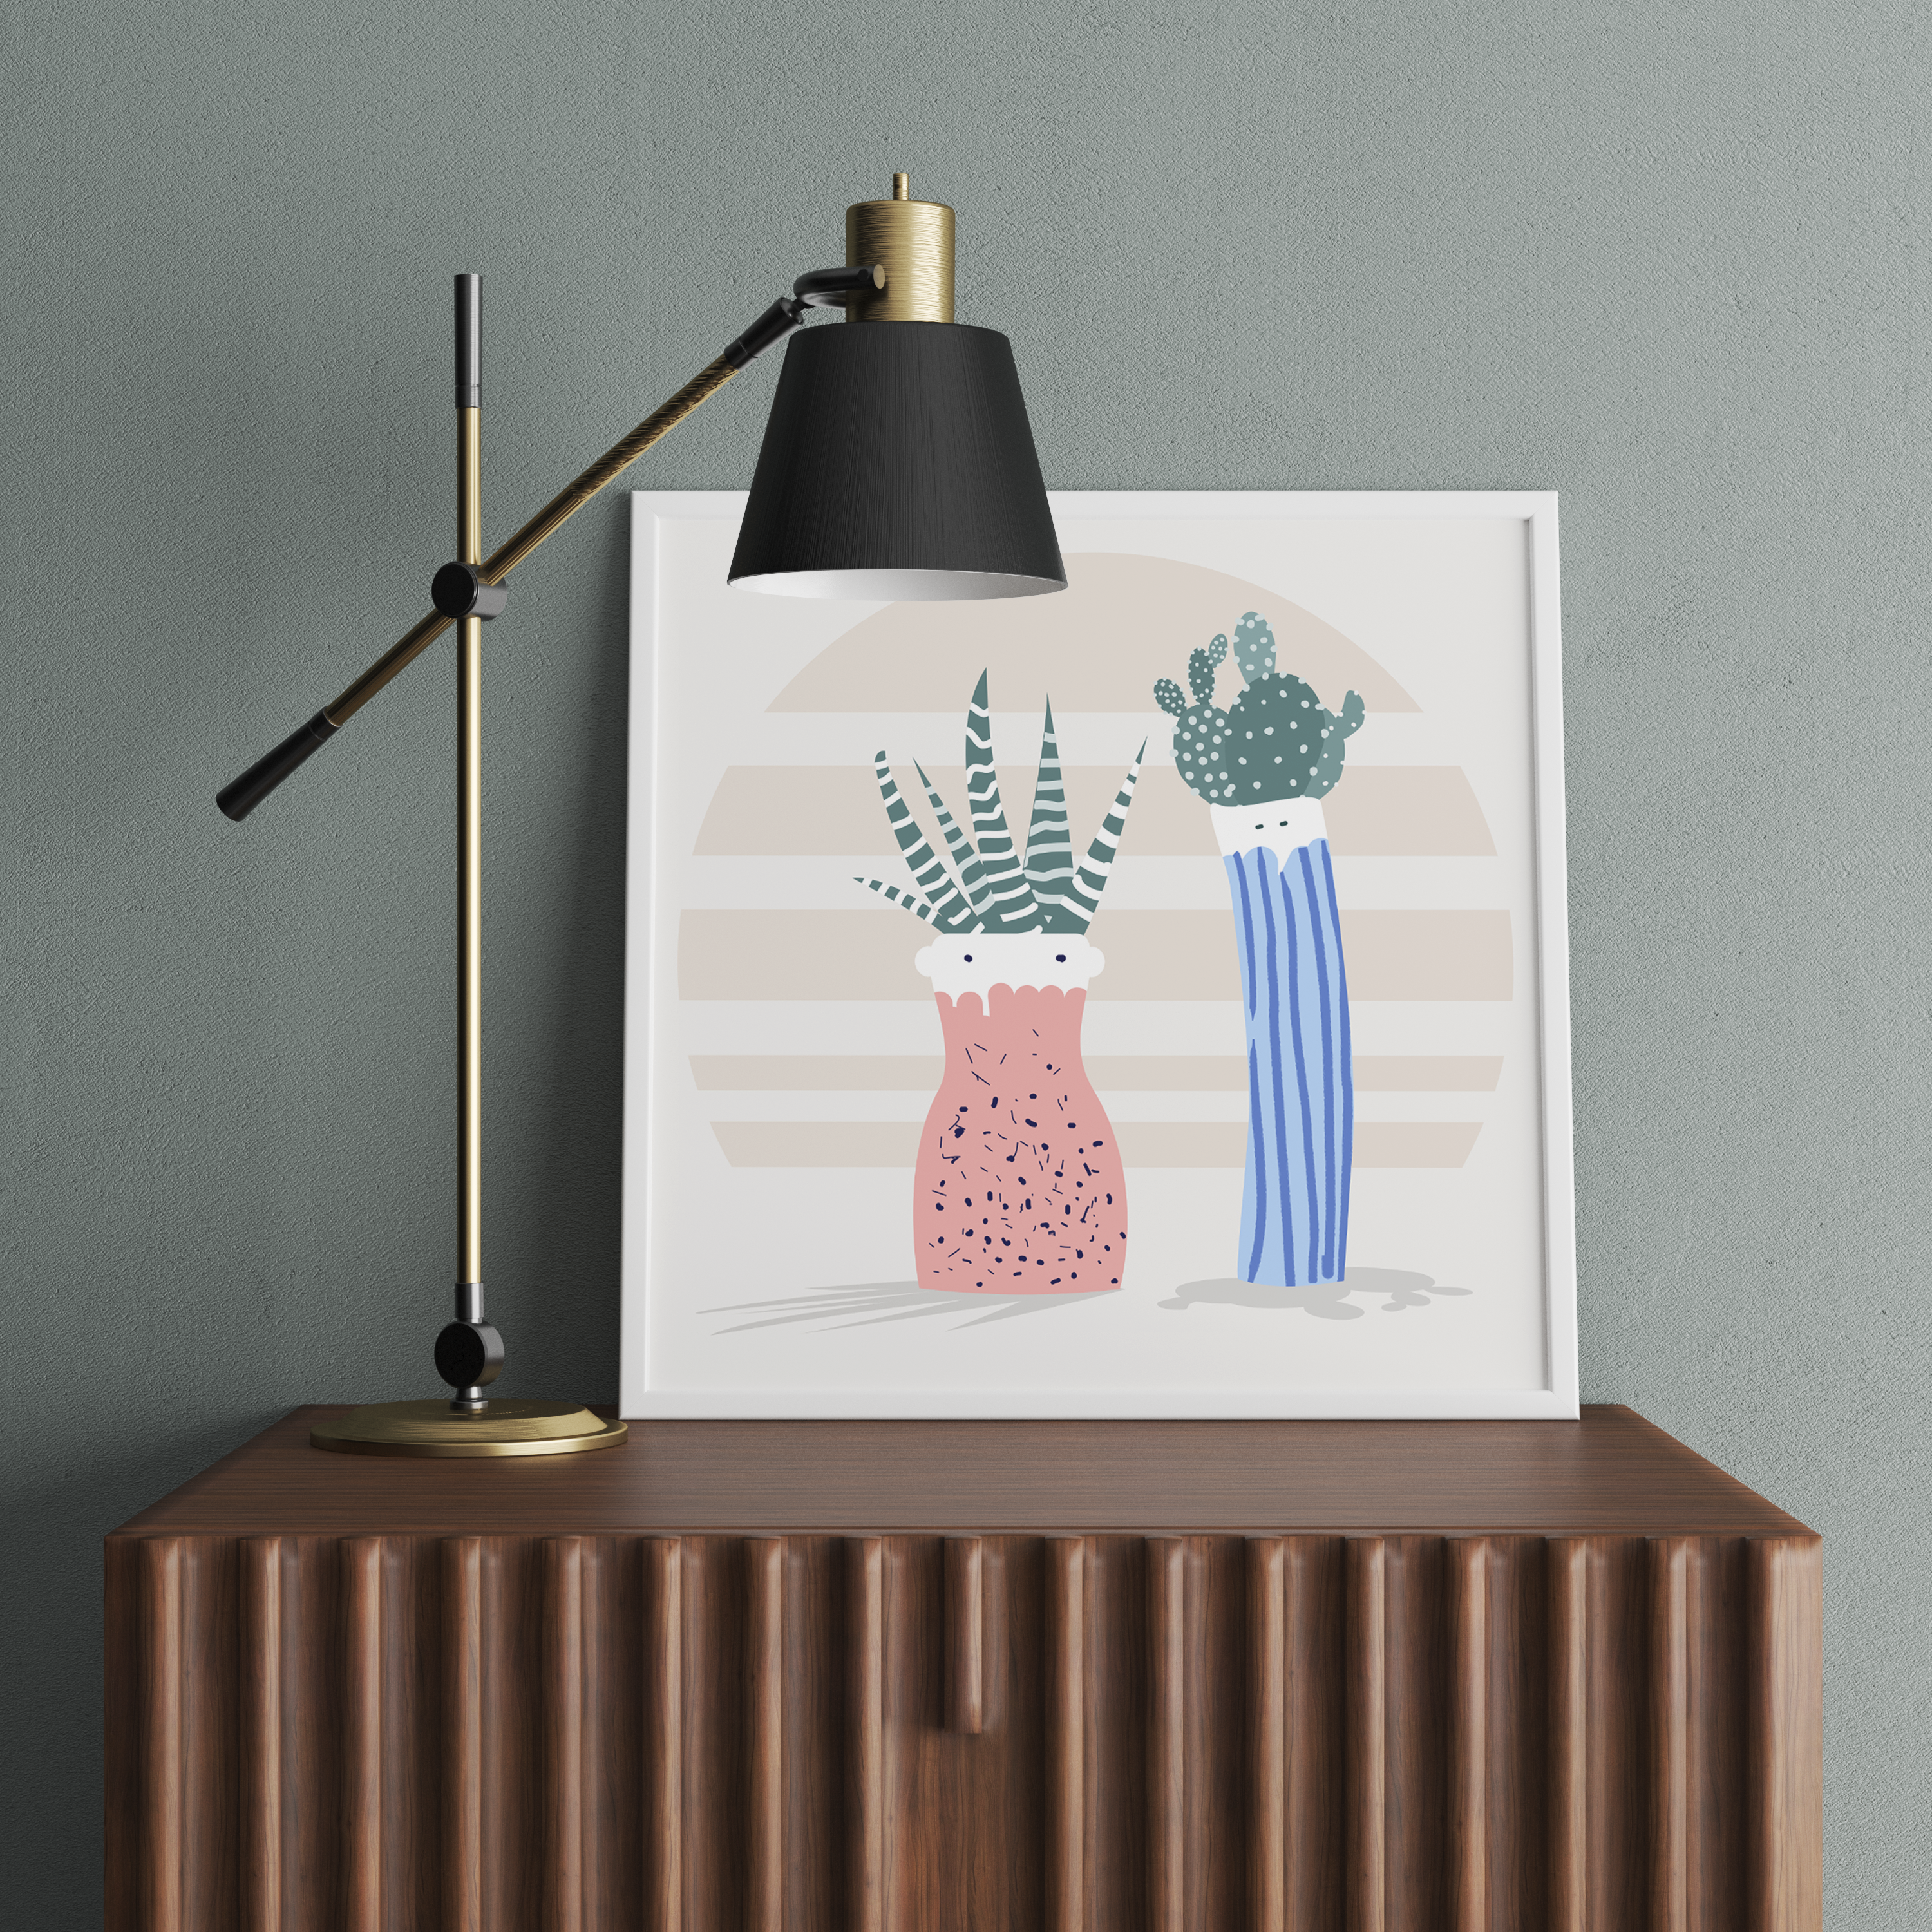 Two potted cacti cartoon style